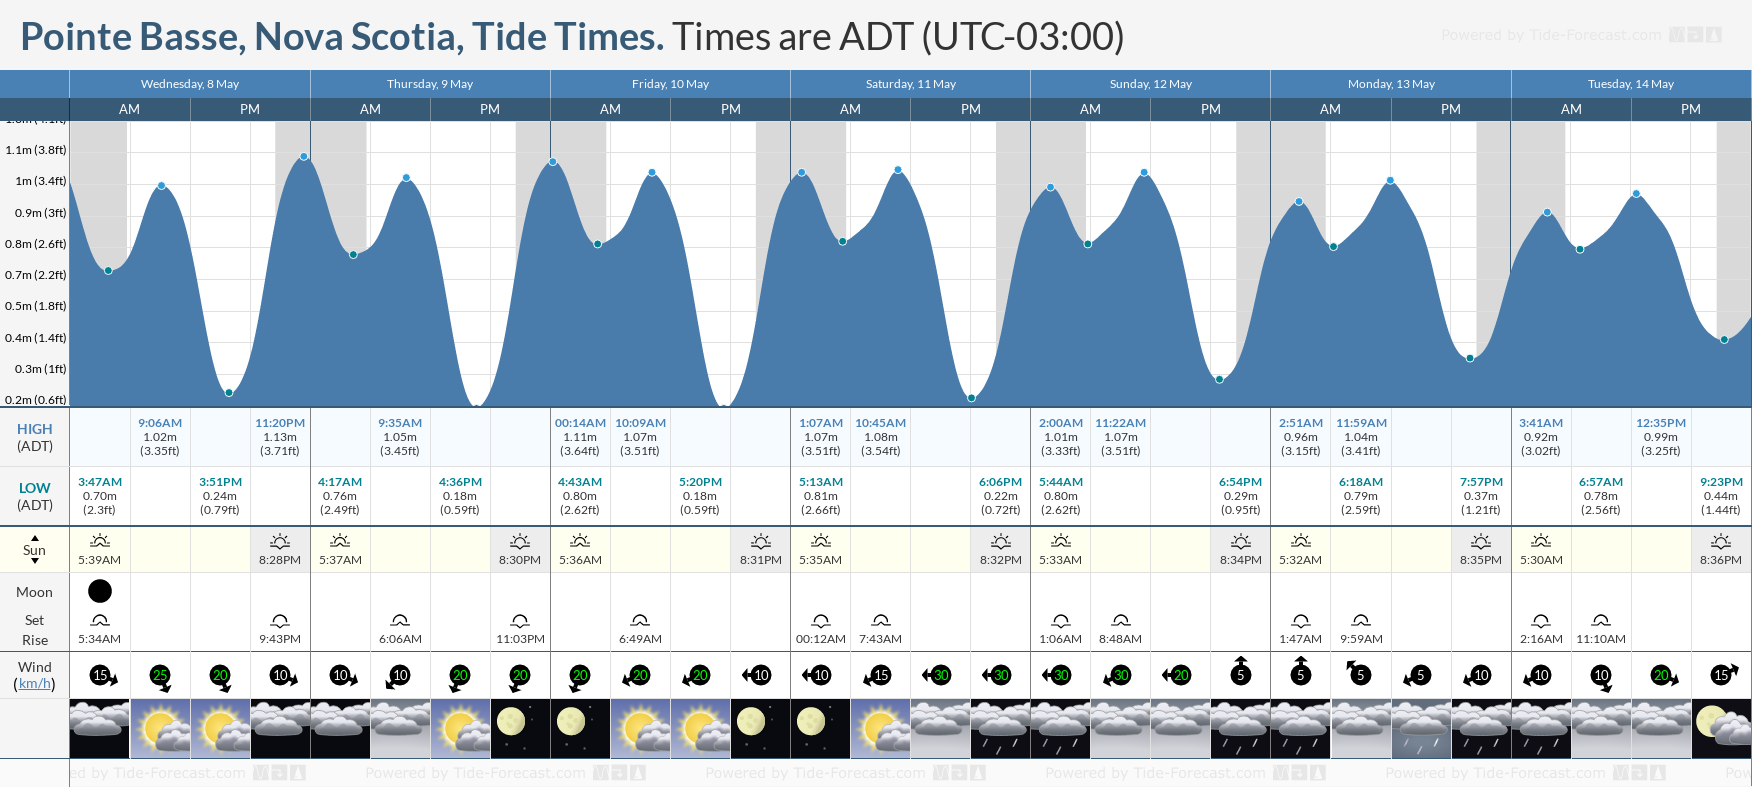 Pointe Basse, Nova Scotia Tide Chart including high and low tide tide times for the next 7 days